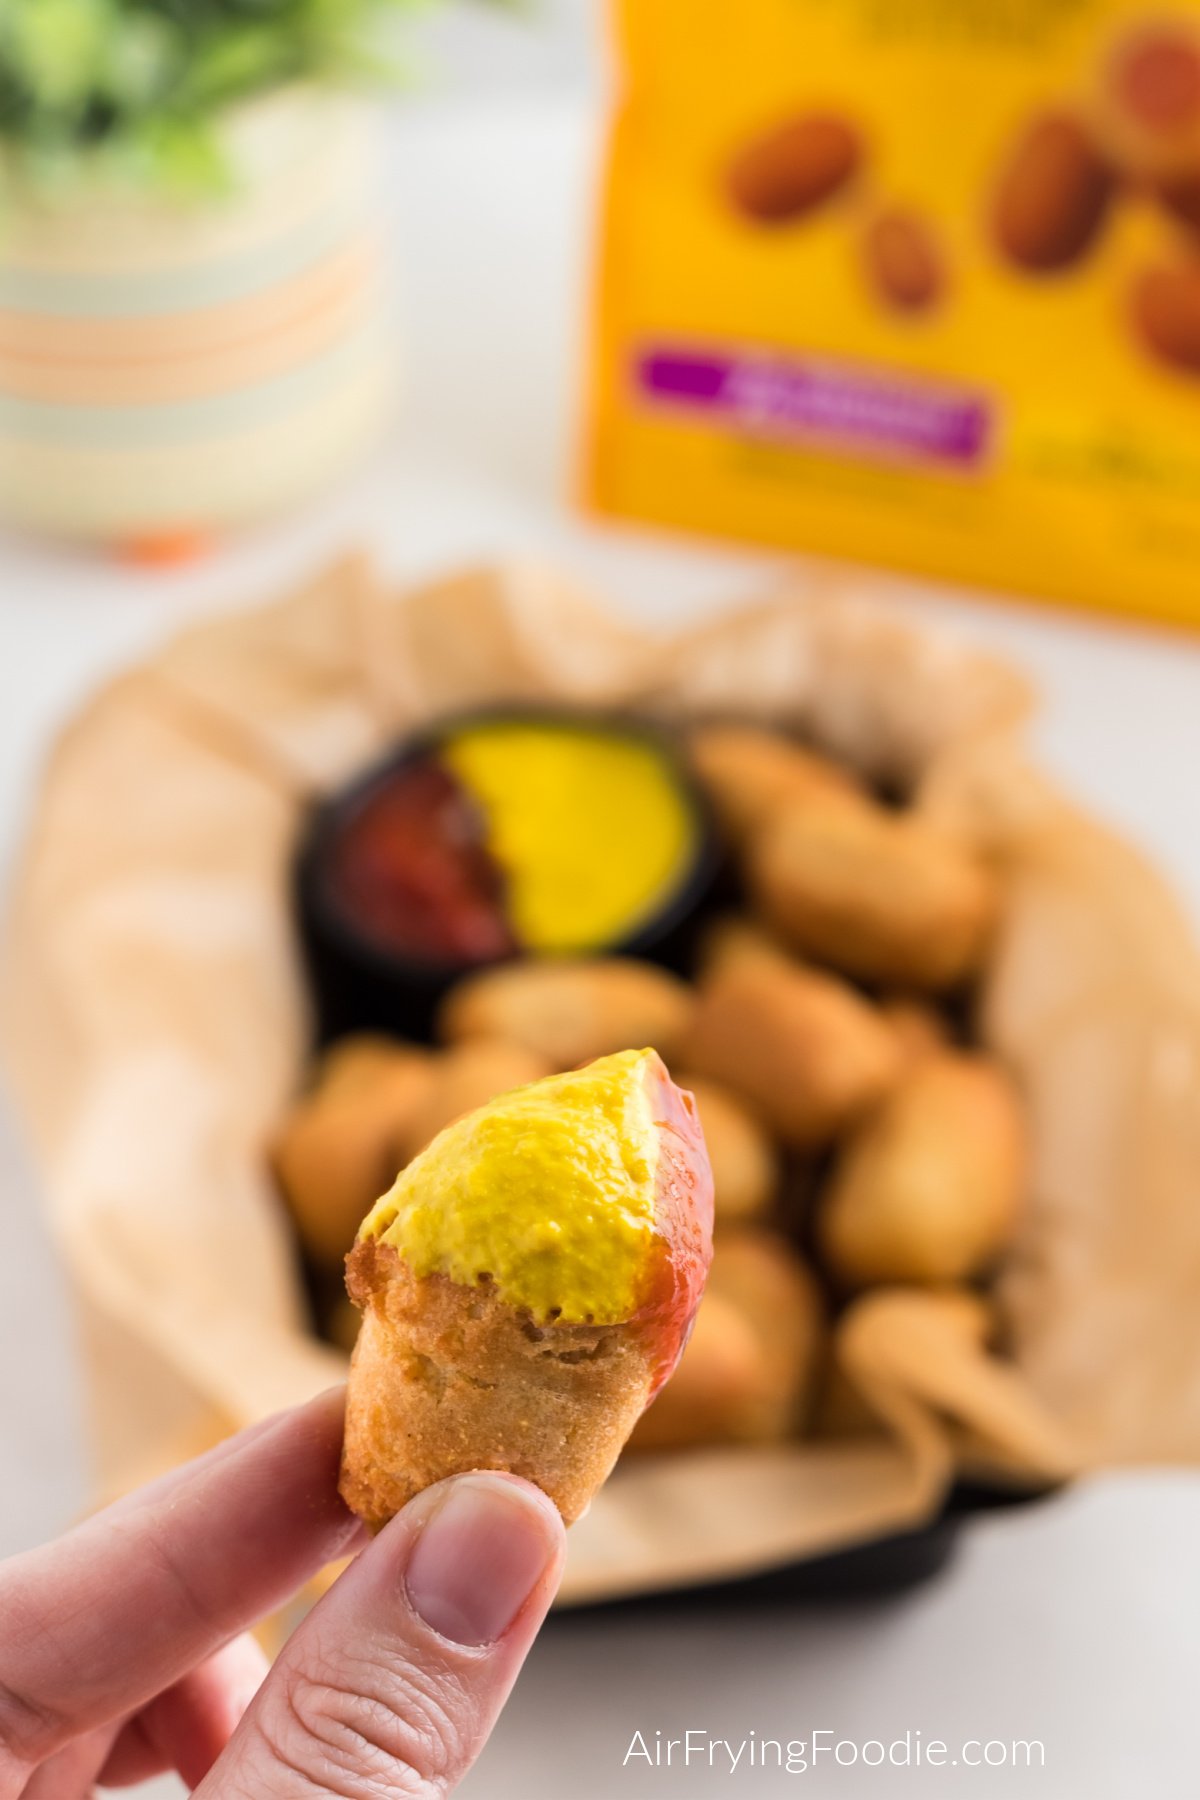 Mini corn dog made in the air fryer, dipped in ketchup and mustard, ready to eat.